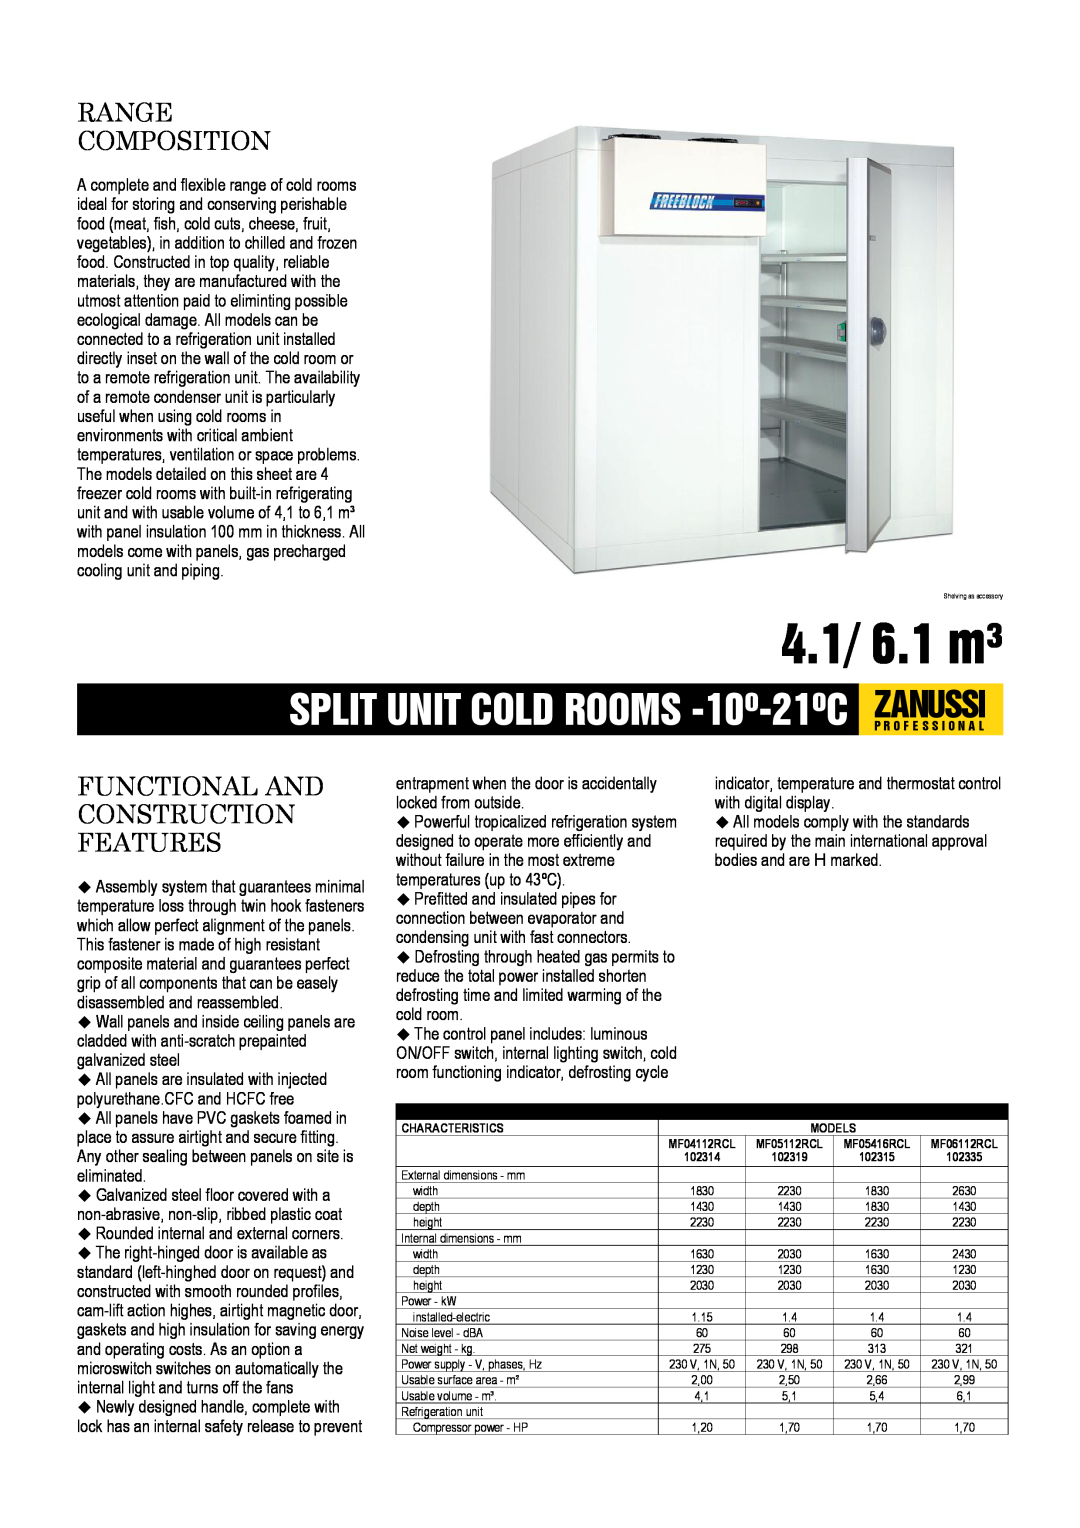 Zanussi MF05416RCL, MF06112RCL, MF04112RCL dimensions 4.1/ 6.1 m³, Range Composition, Functional And Construction Features 